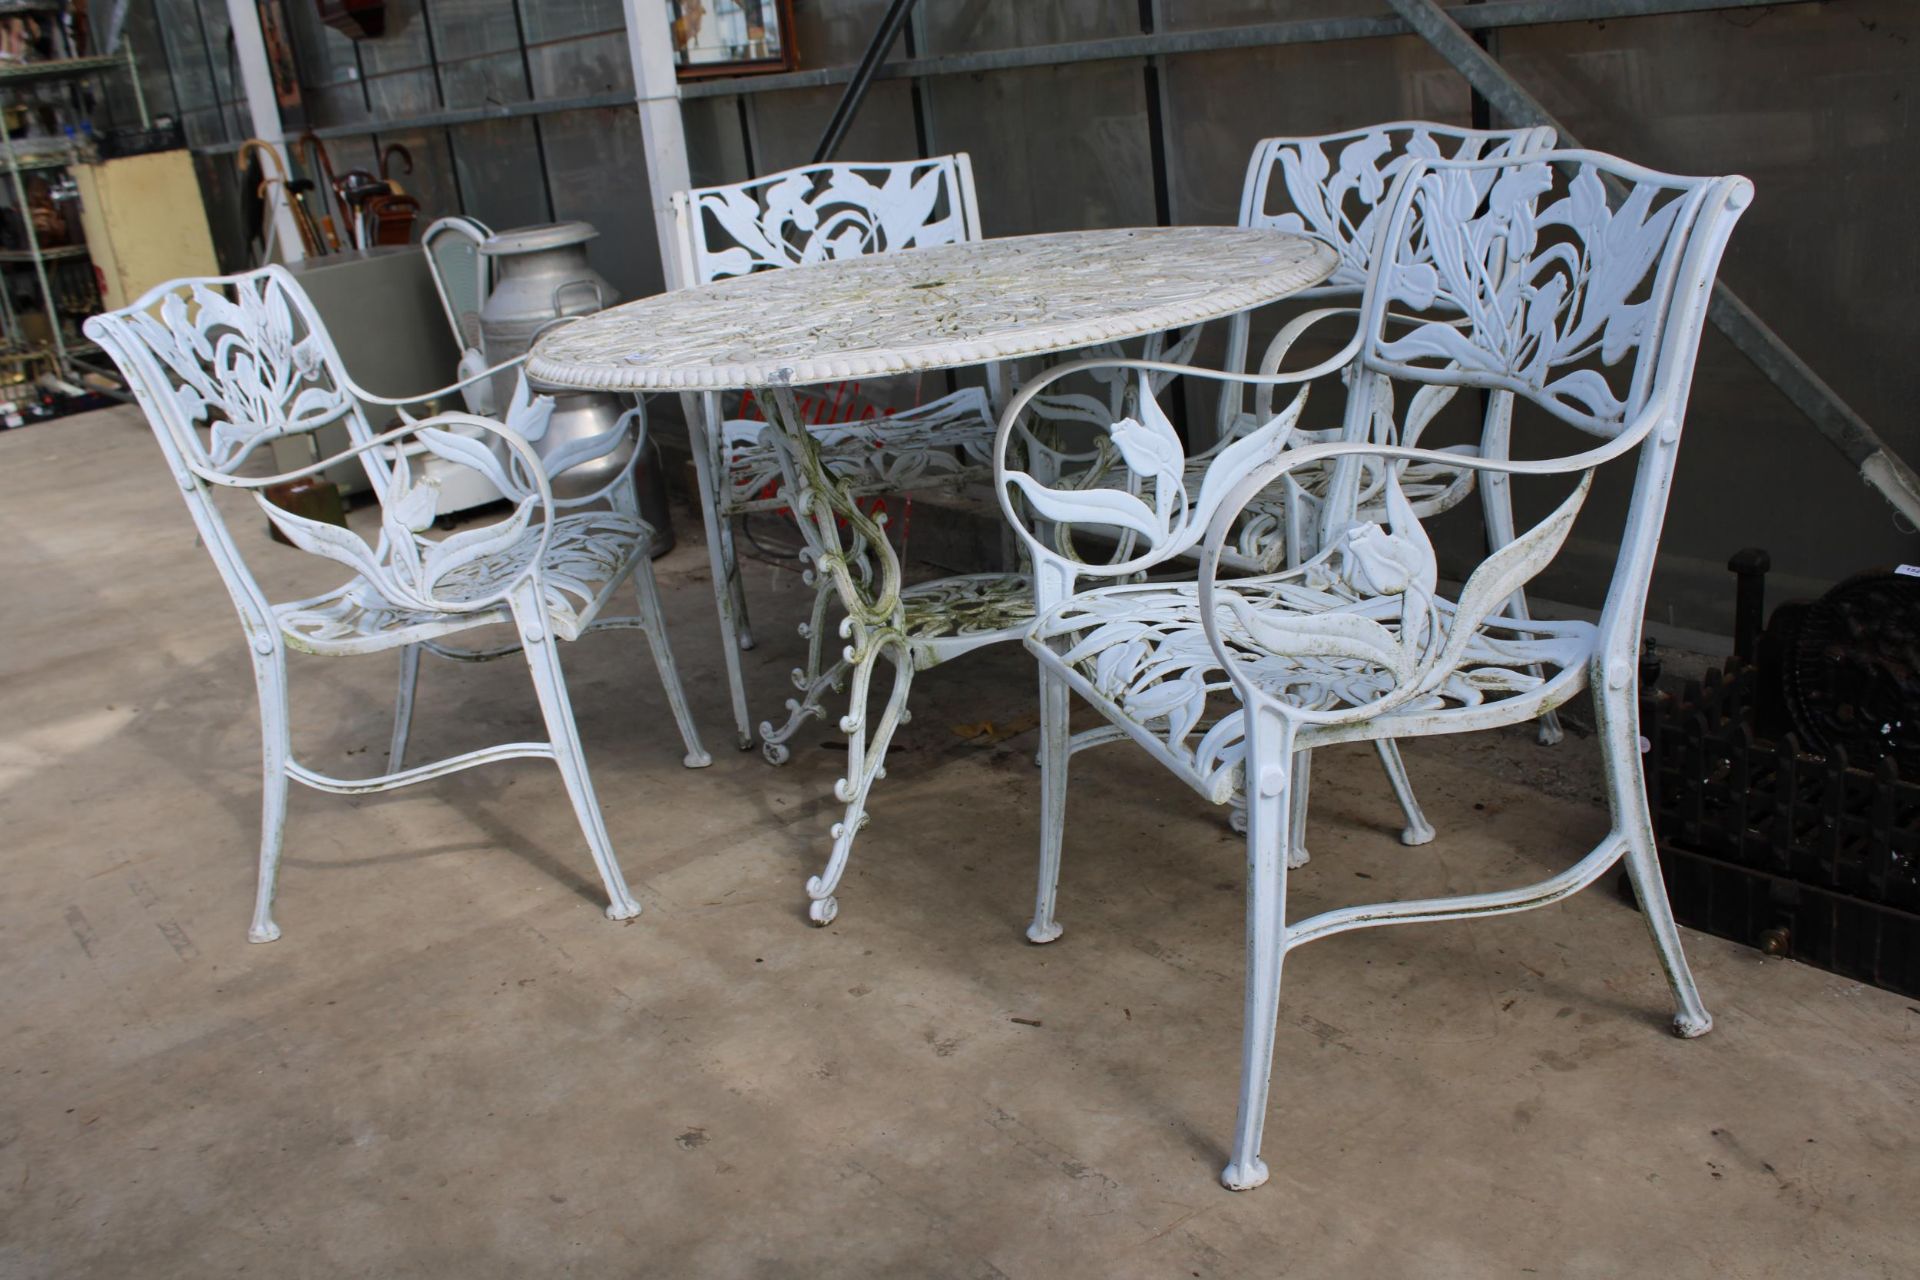 A WHITE CAST ALLOY BISTRO SET COMPRISING OF A LARGE ROUND TABLE AND FOUR CARVER CHAIRS - Bild 3 aus 3